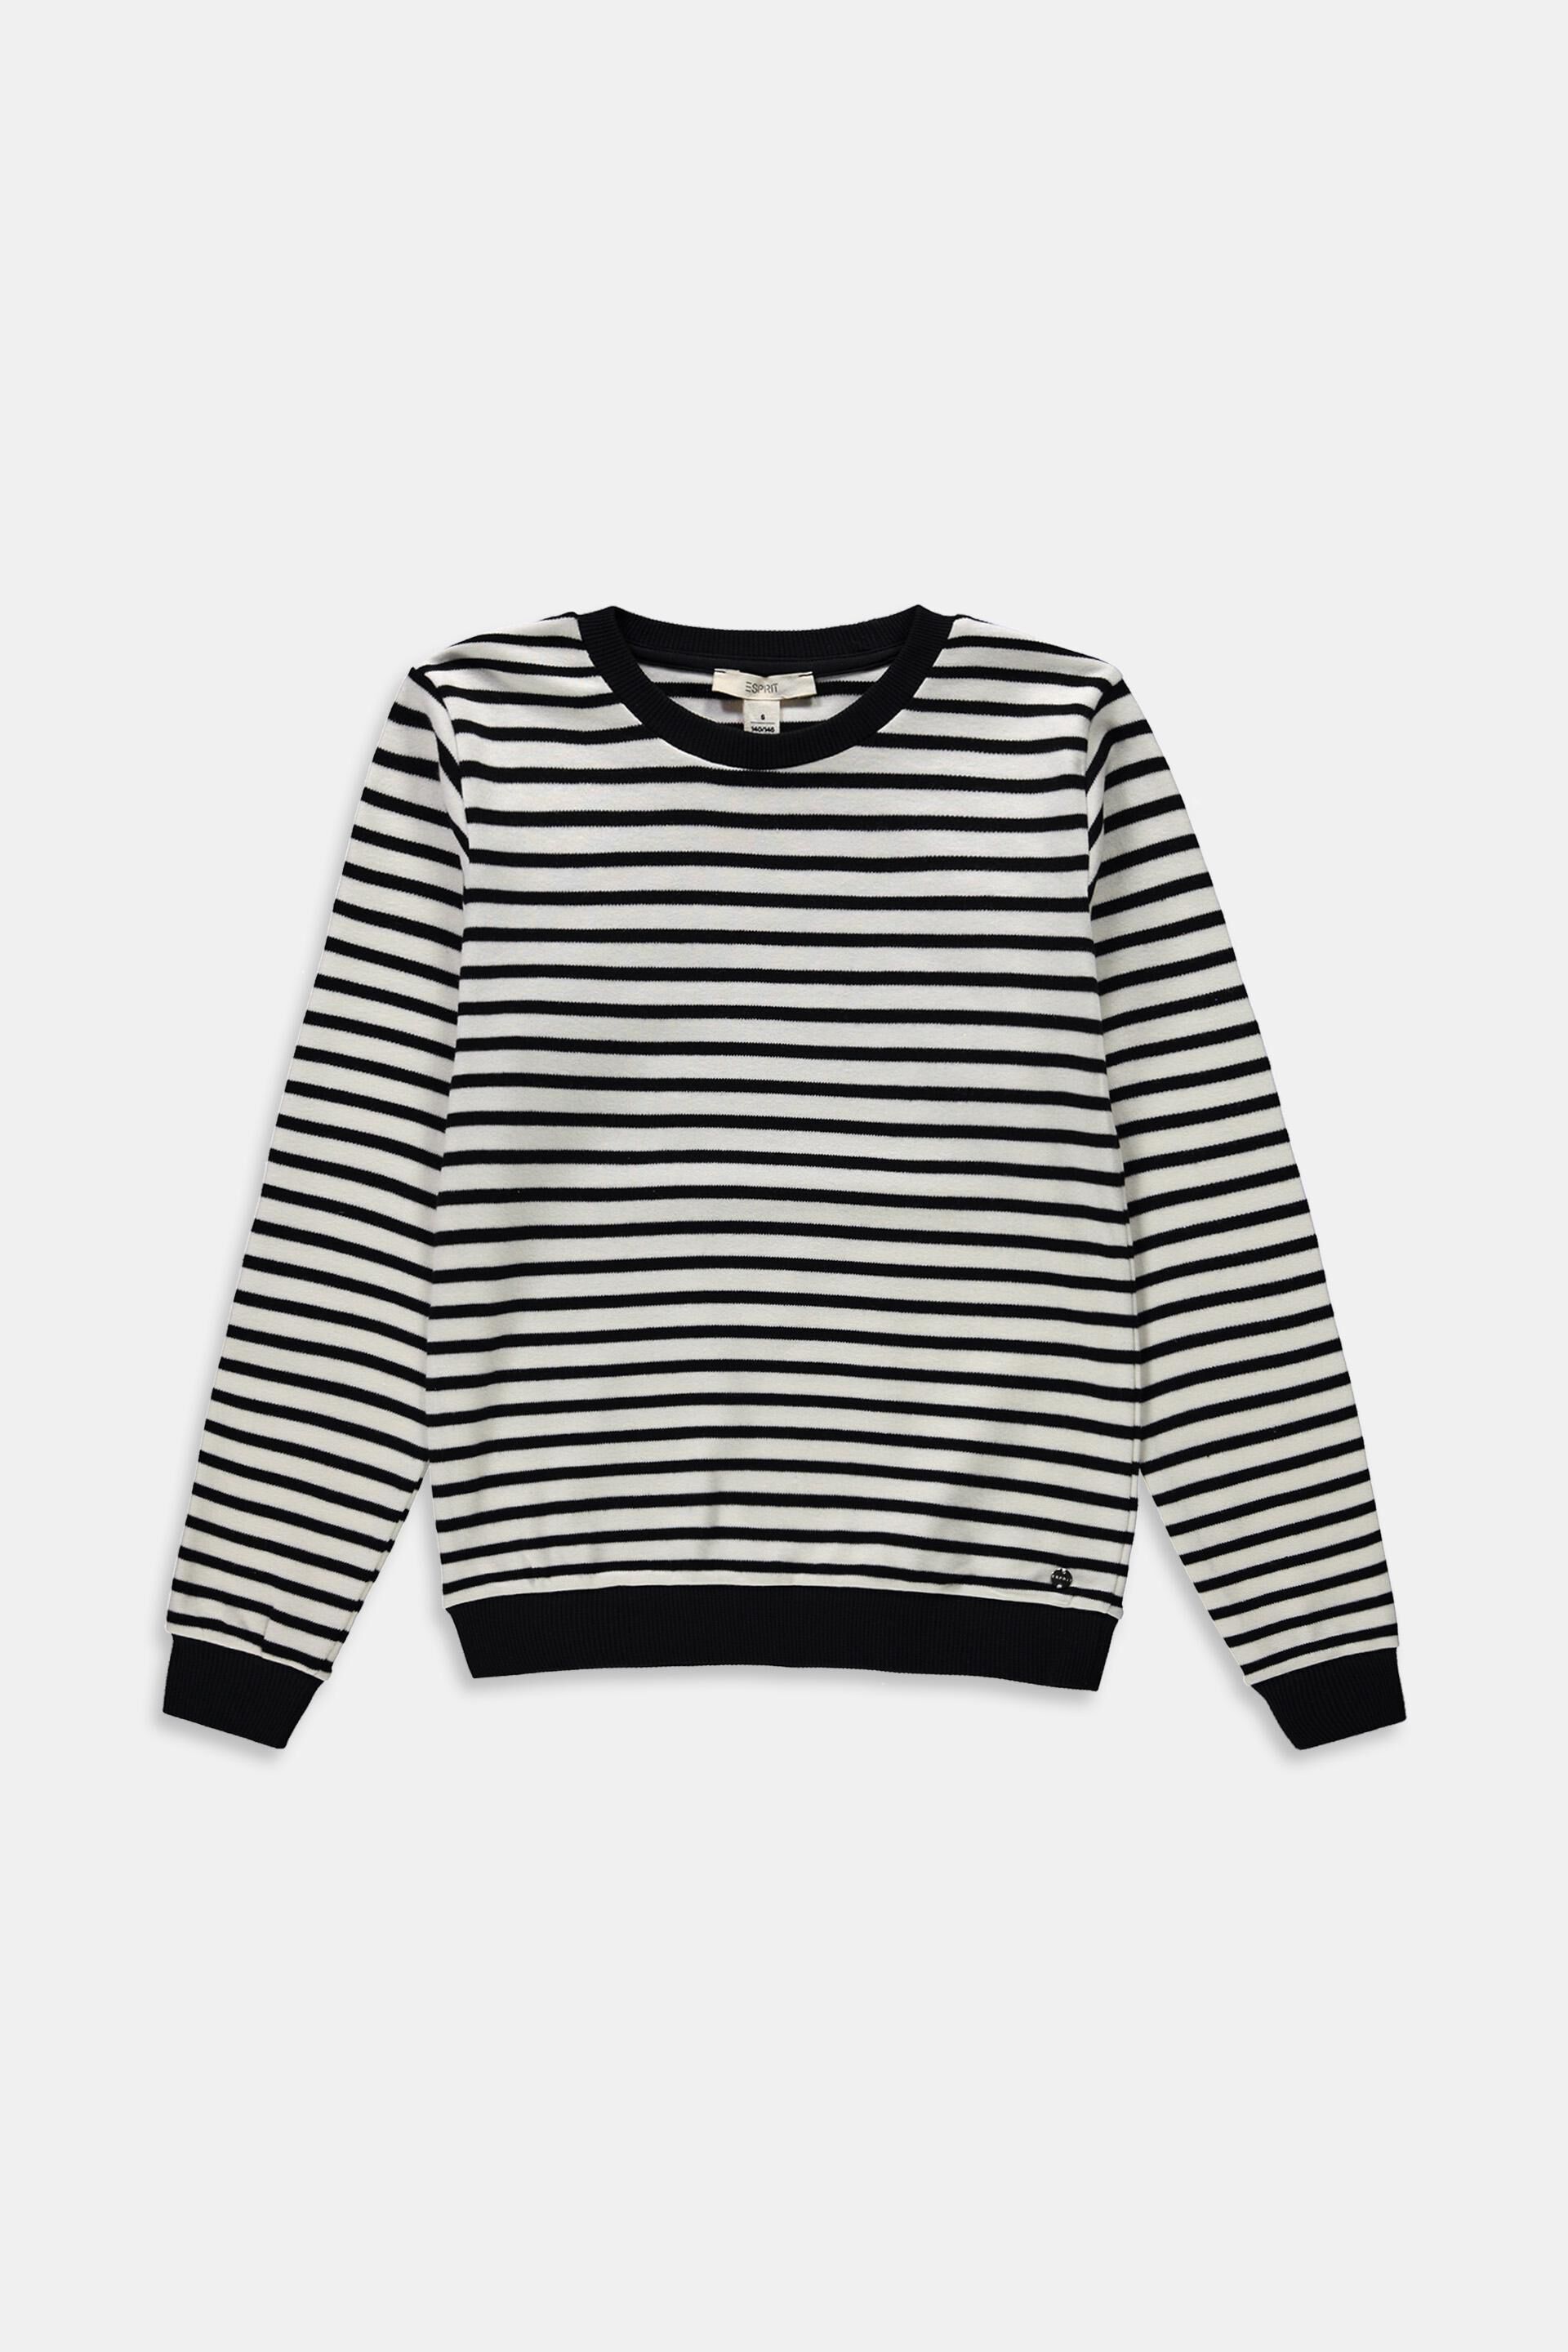 Esprit Striped top long-sleeved